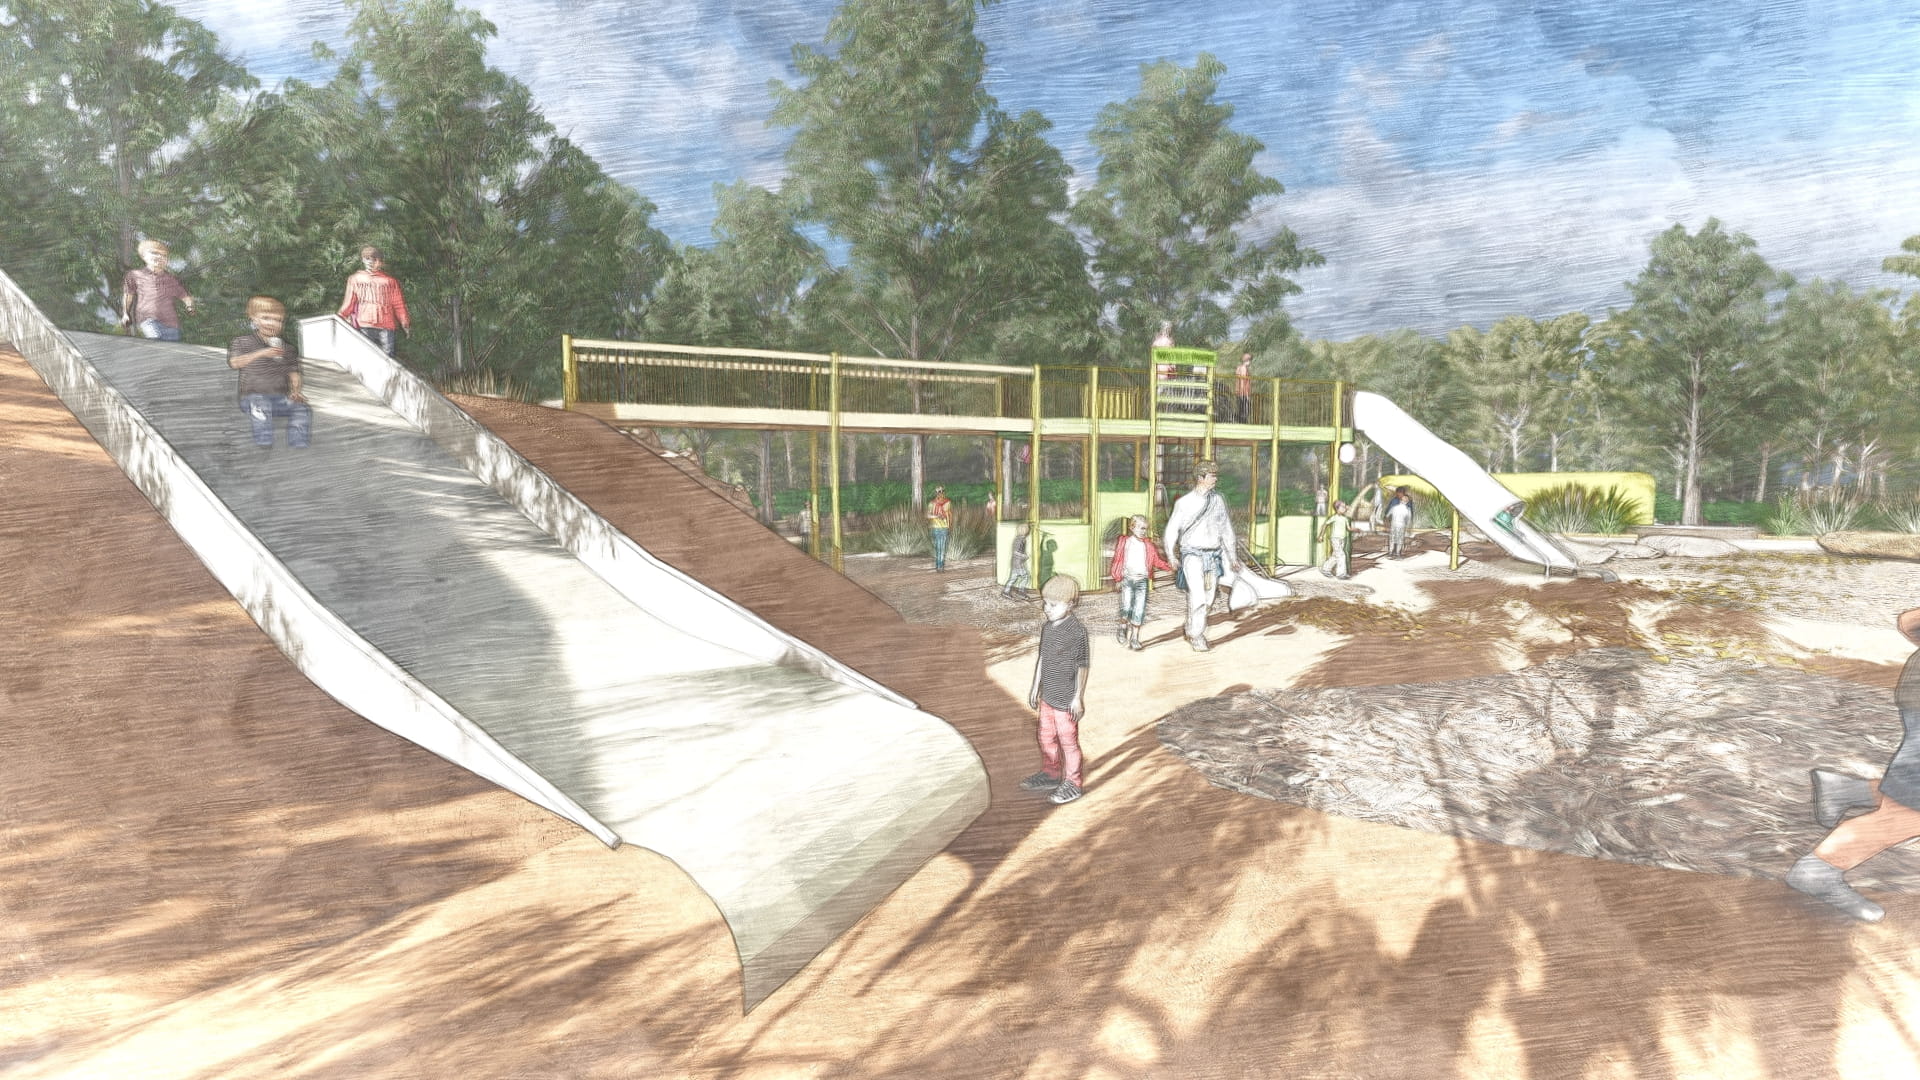 Play mound slide with the tram fort for new playscape at Wattle Park